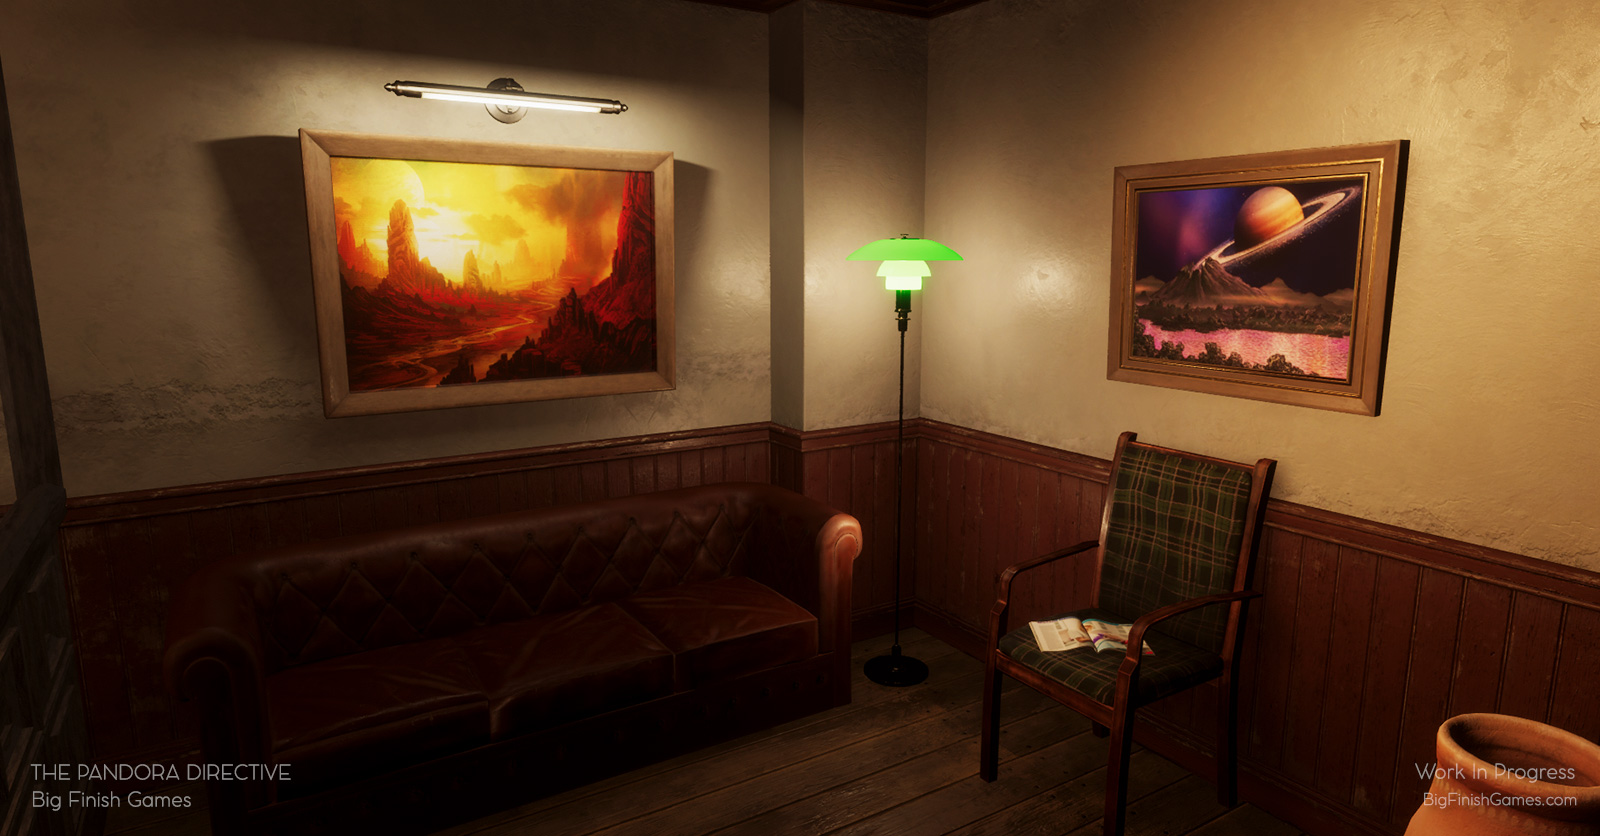 The waiting area of Tex Murphy's office. An unoccupied leather couch and chair sits in the corner. An open magazine is on the chair and two alien landscape paintings accent the space.